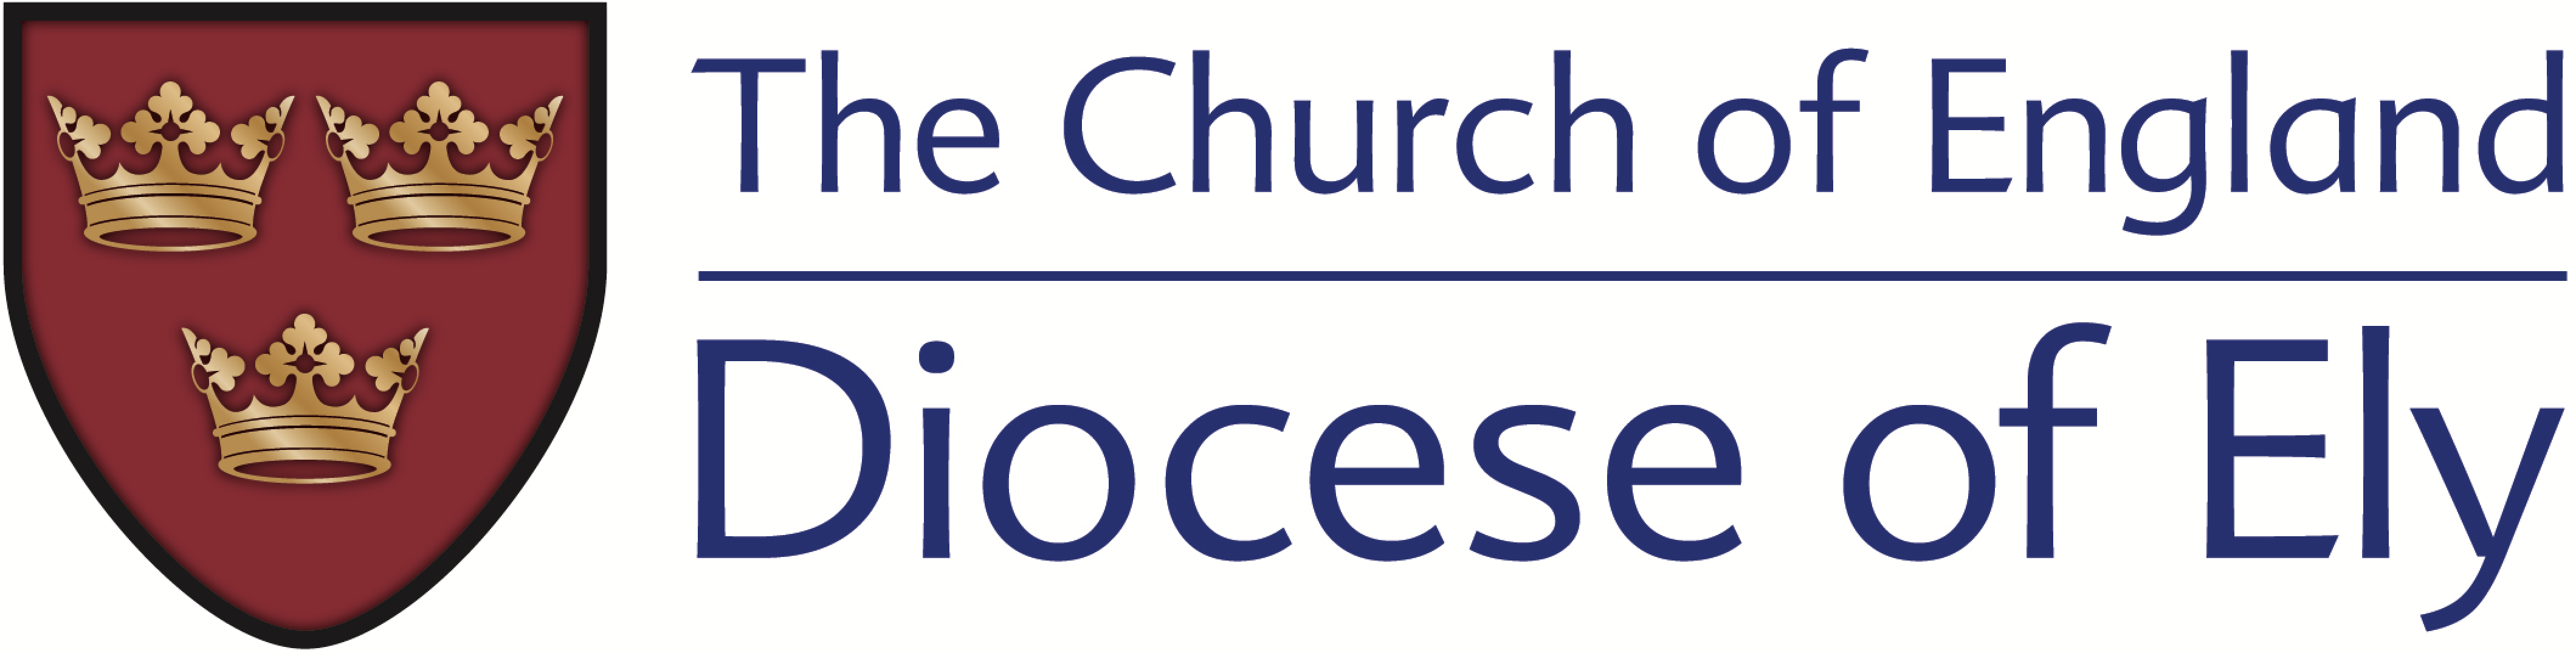 Diocese of Ely logo - close cr